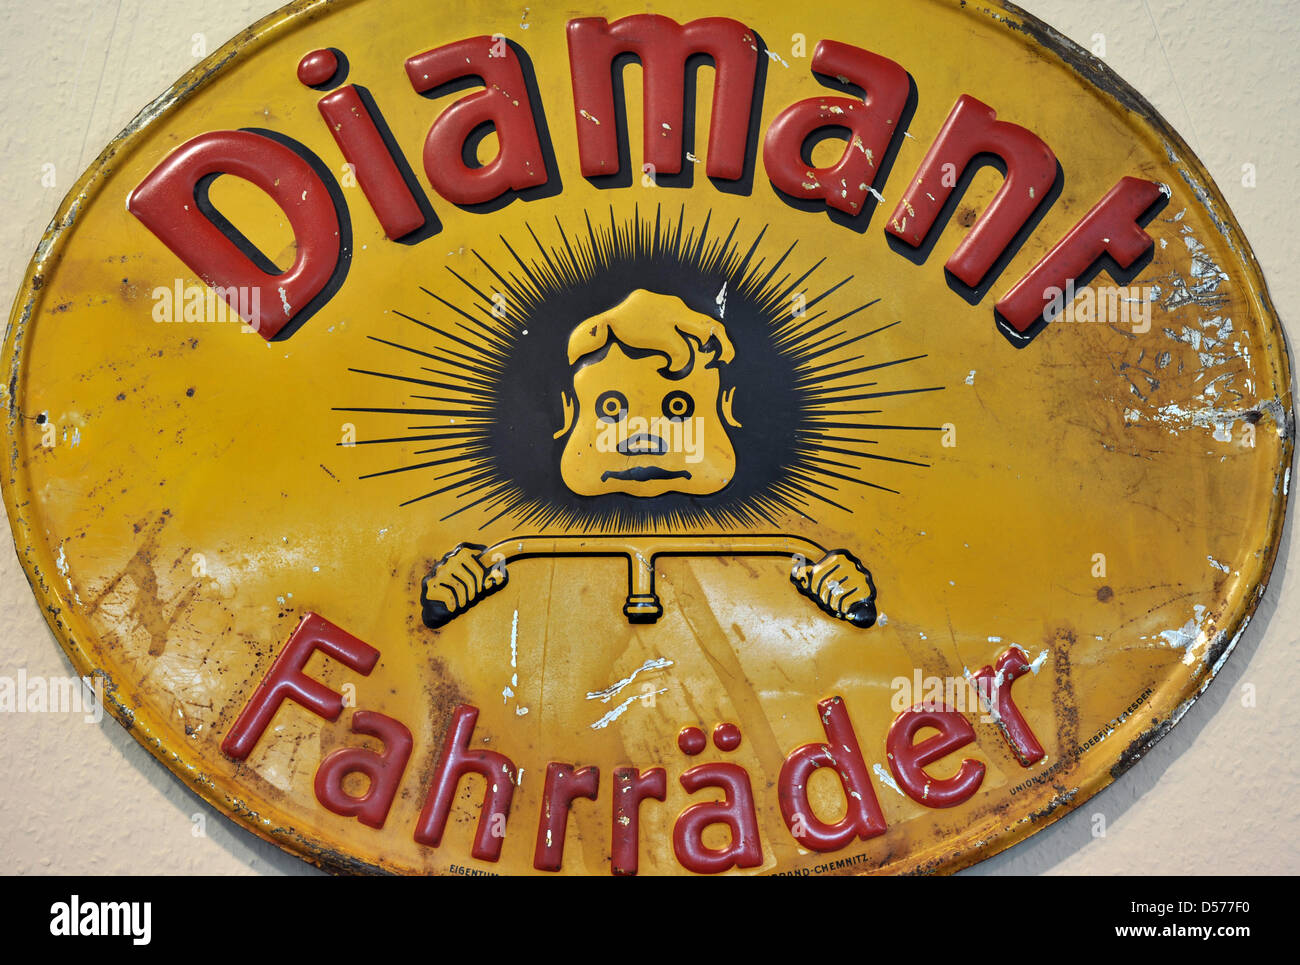 The logo of bicycle company 'Diamant' in Hartmannsdorf, Germany, 23 April  2010. Numerous guests are expected for the celebration of the 125th  anniversary of bicycle manufacturer 'Diamant'. In 1885, the brothers  Friedrich